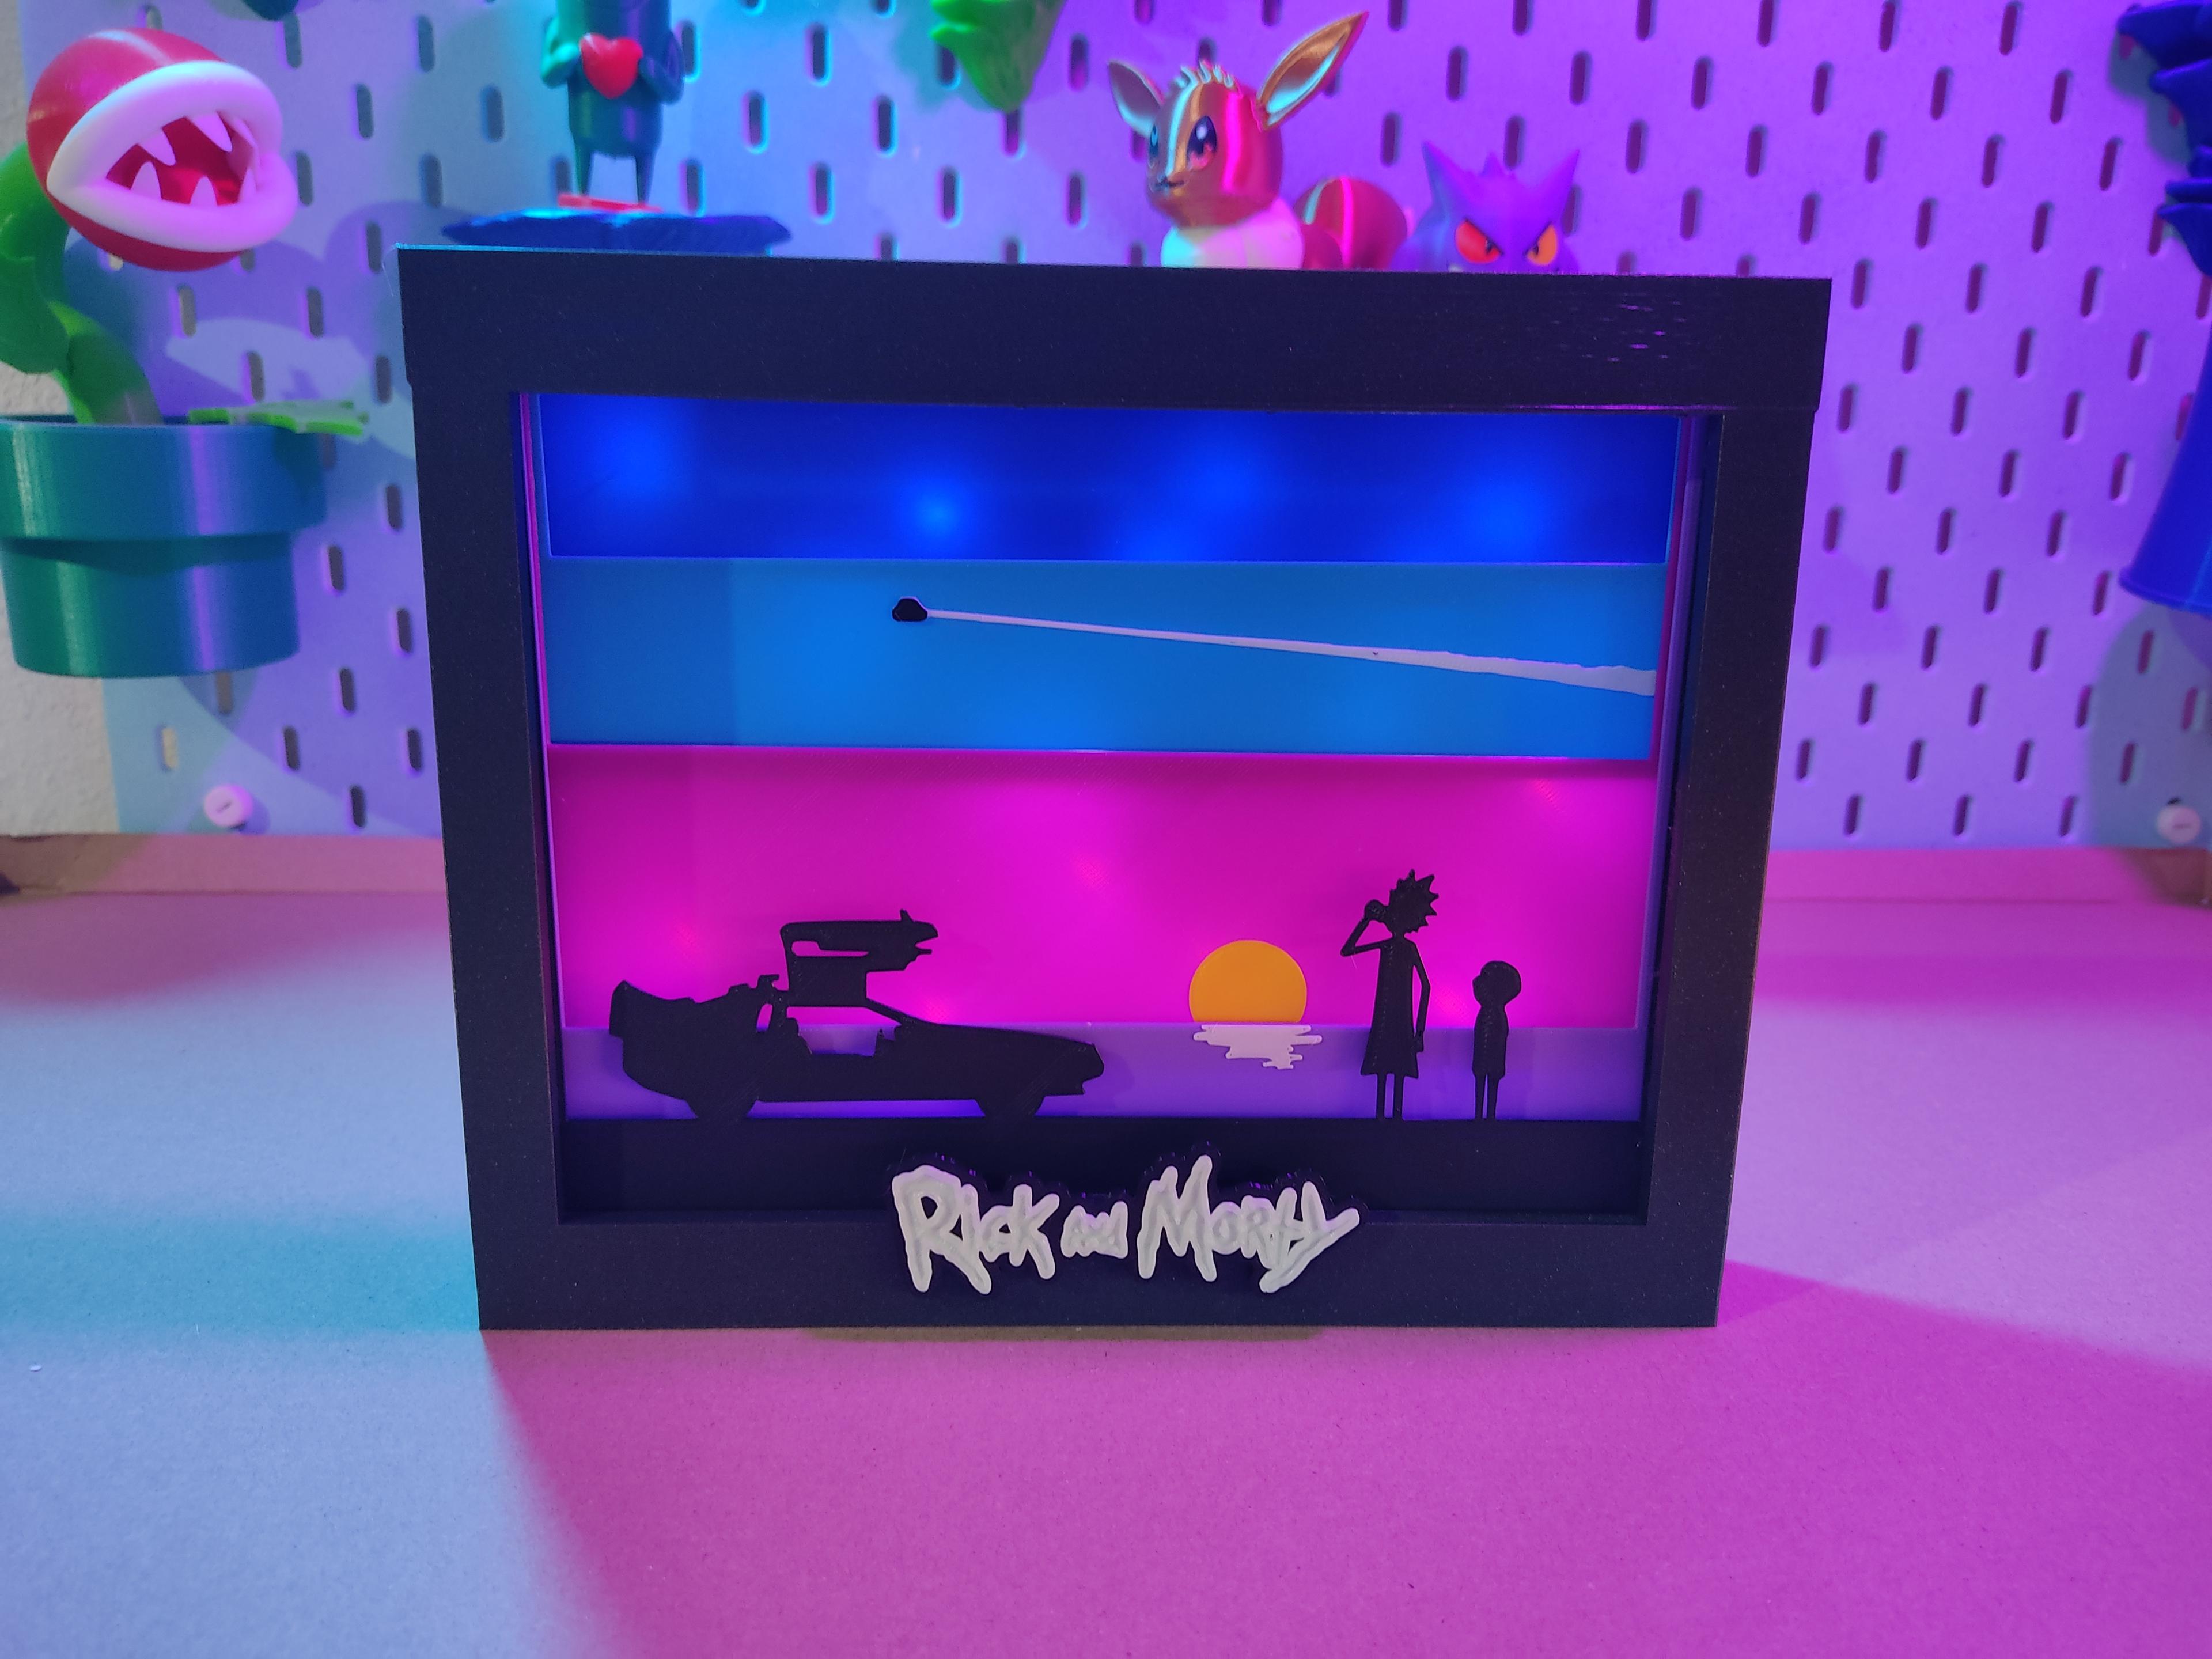 Rick and Morty plates and logo for Light and Shadow Box 3d model